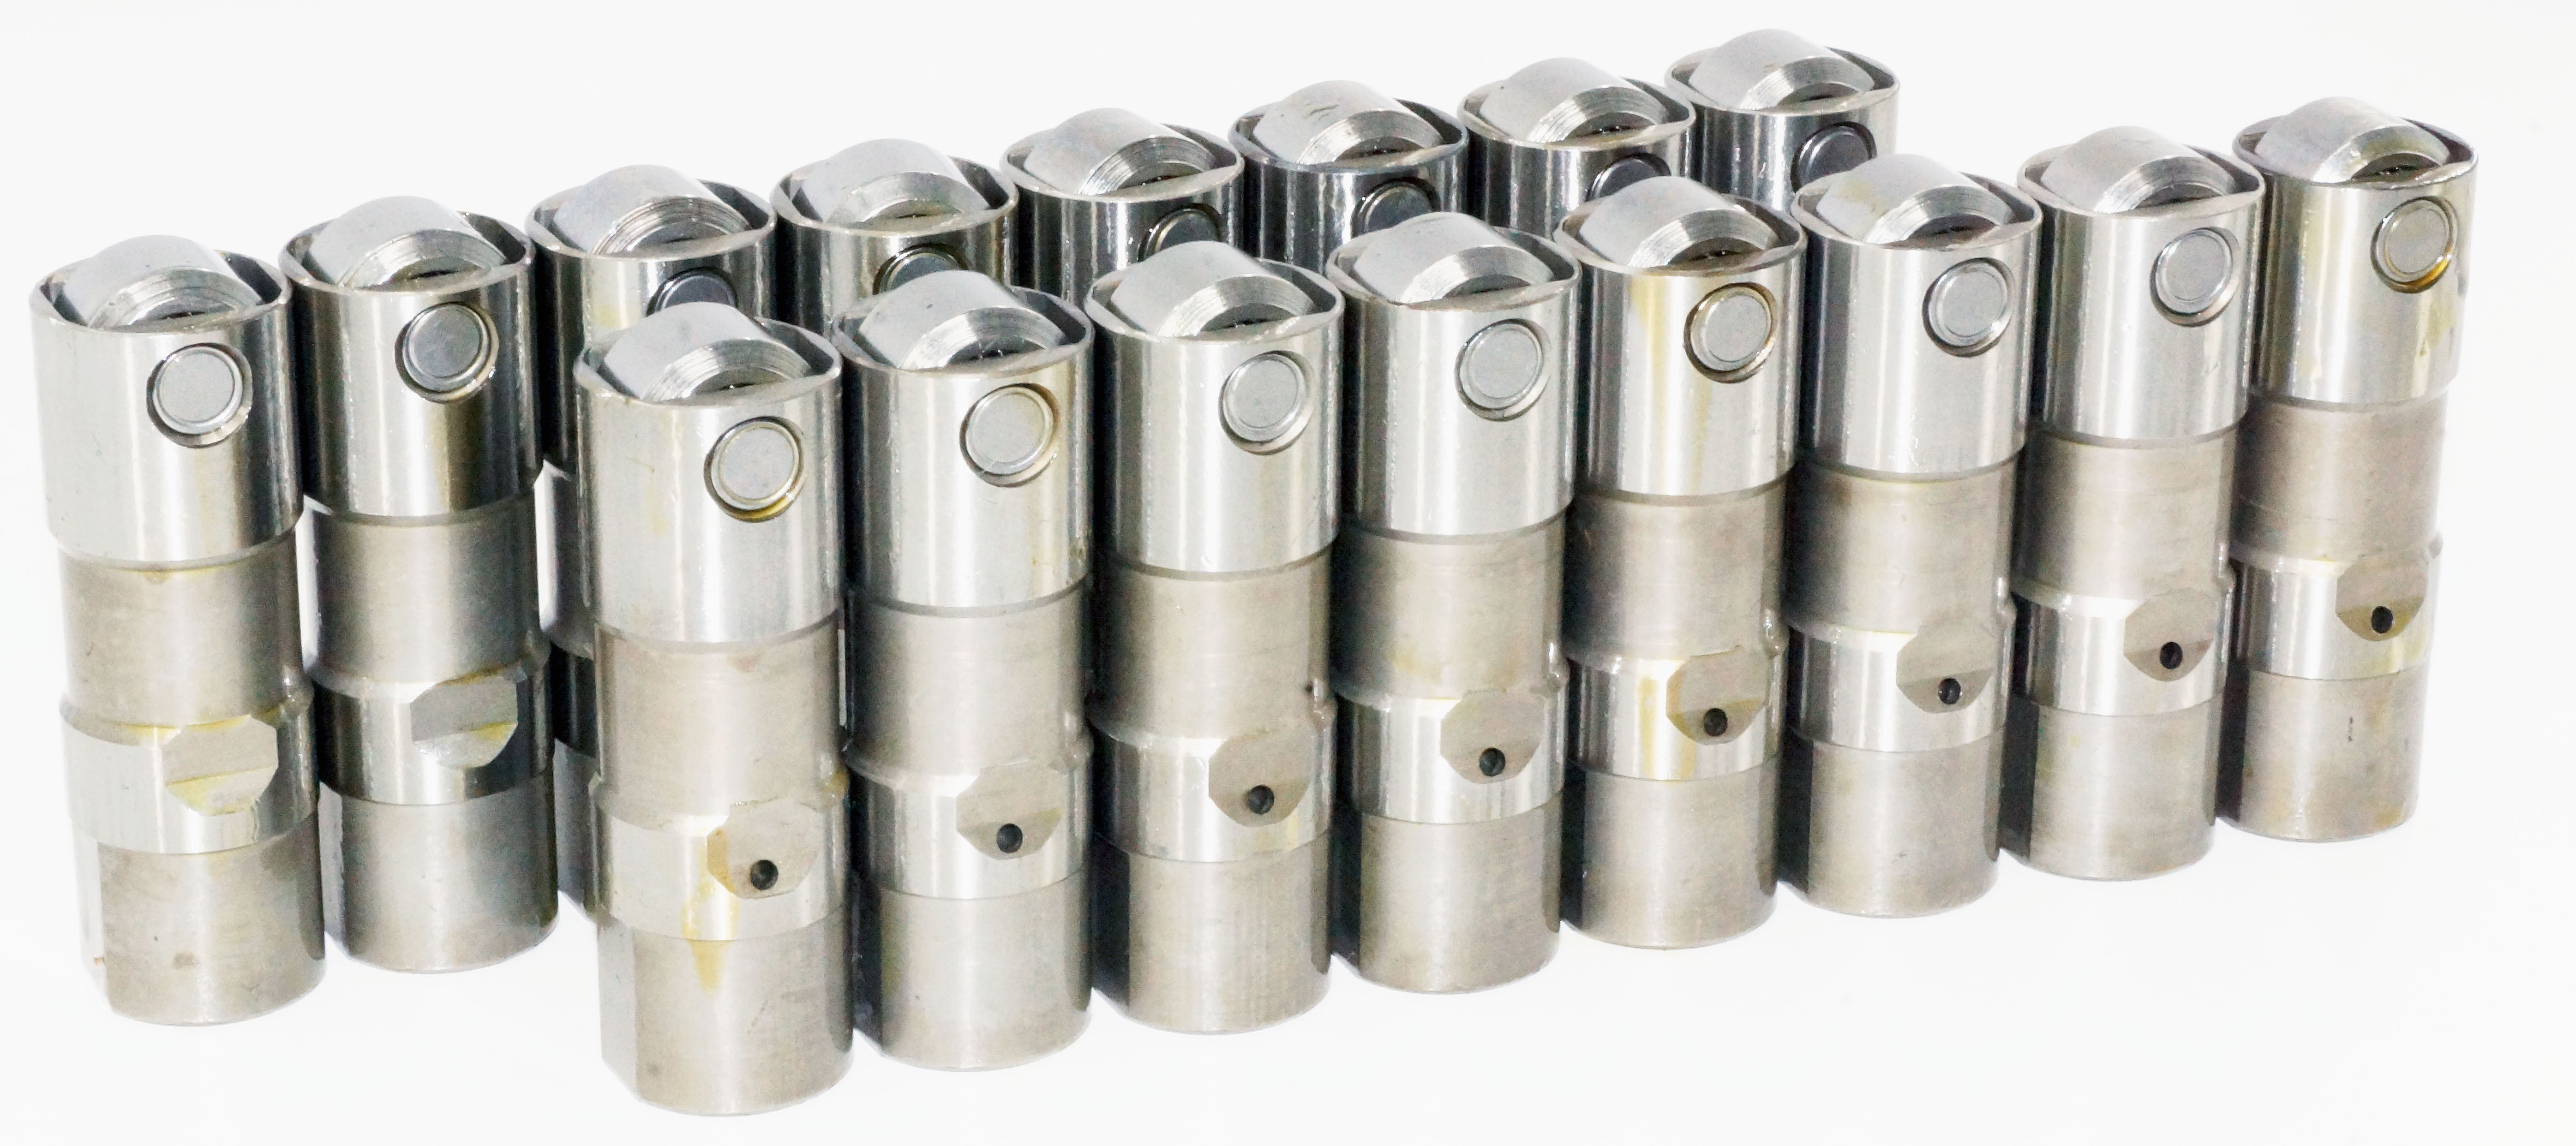 New OEM LS7 LS2 Set of 16 GM Performance Hydraulic Roller Lifters HL124 - image 2